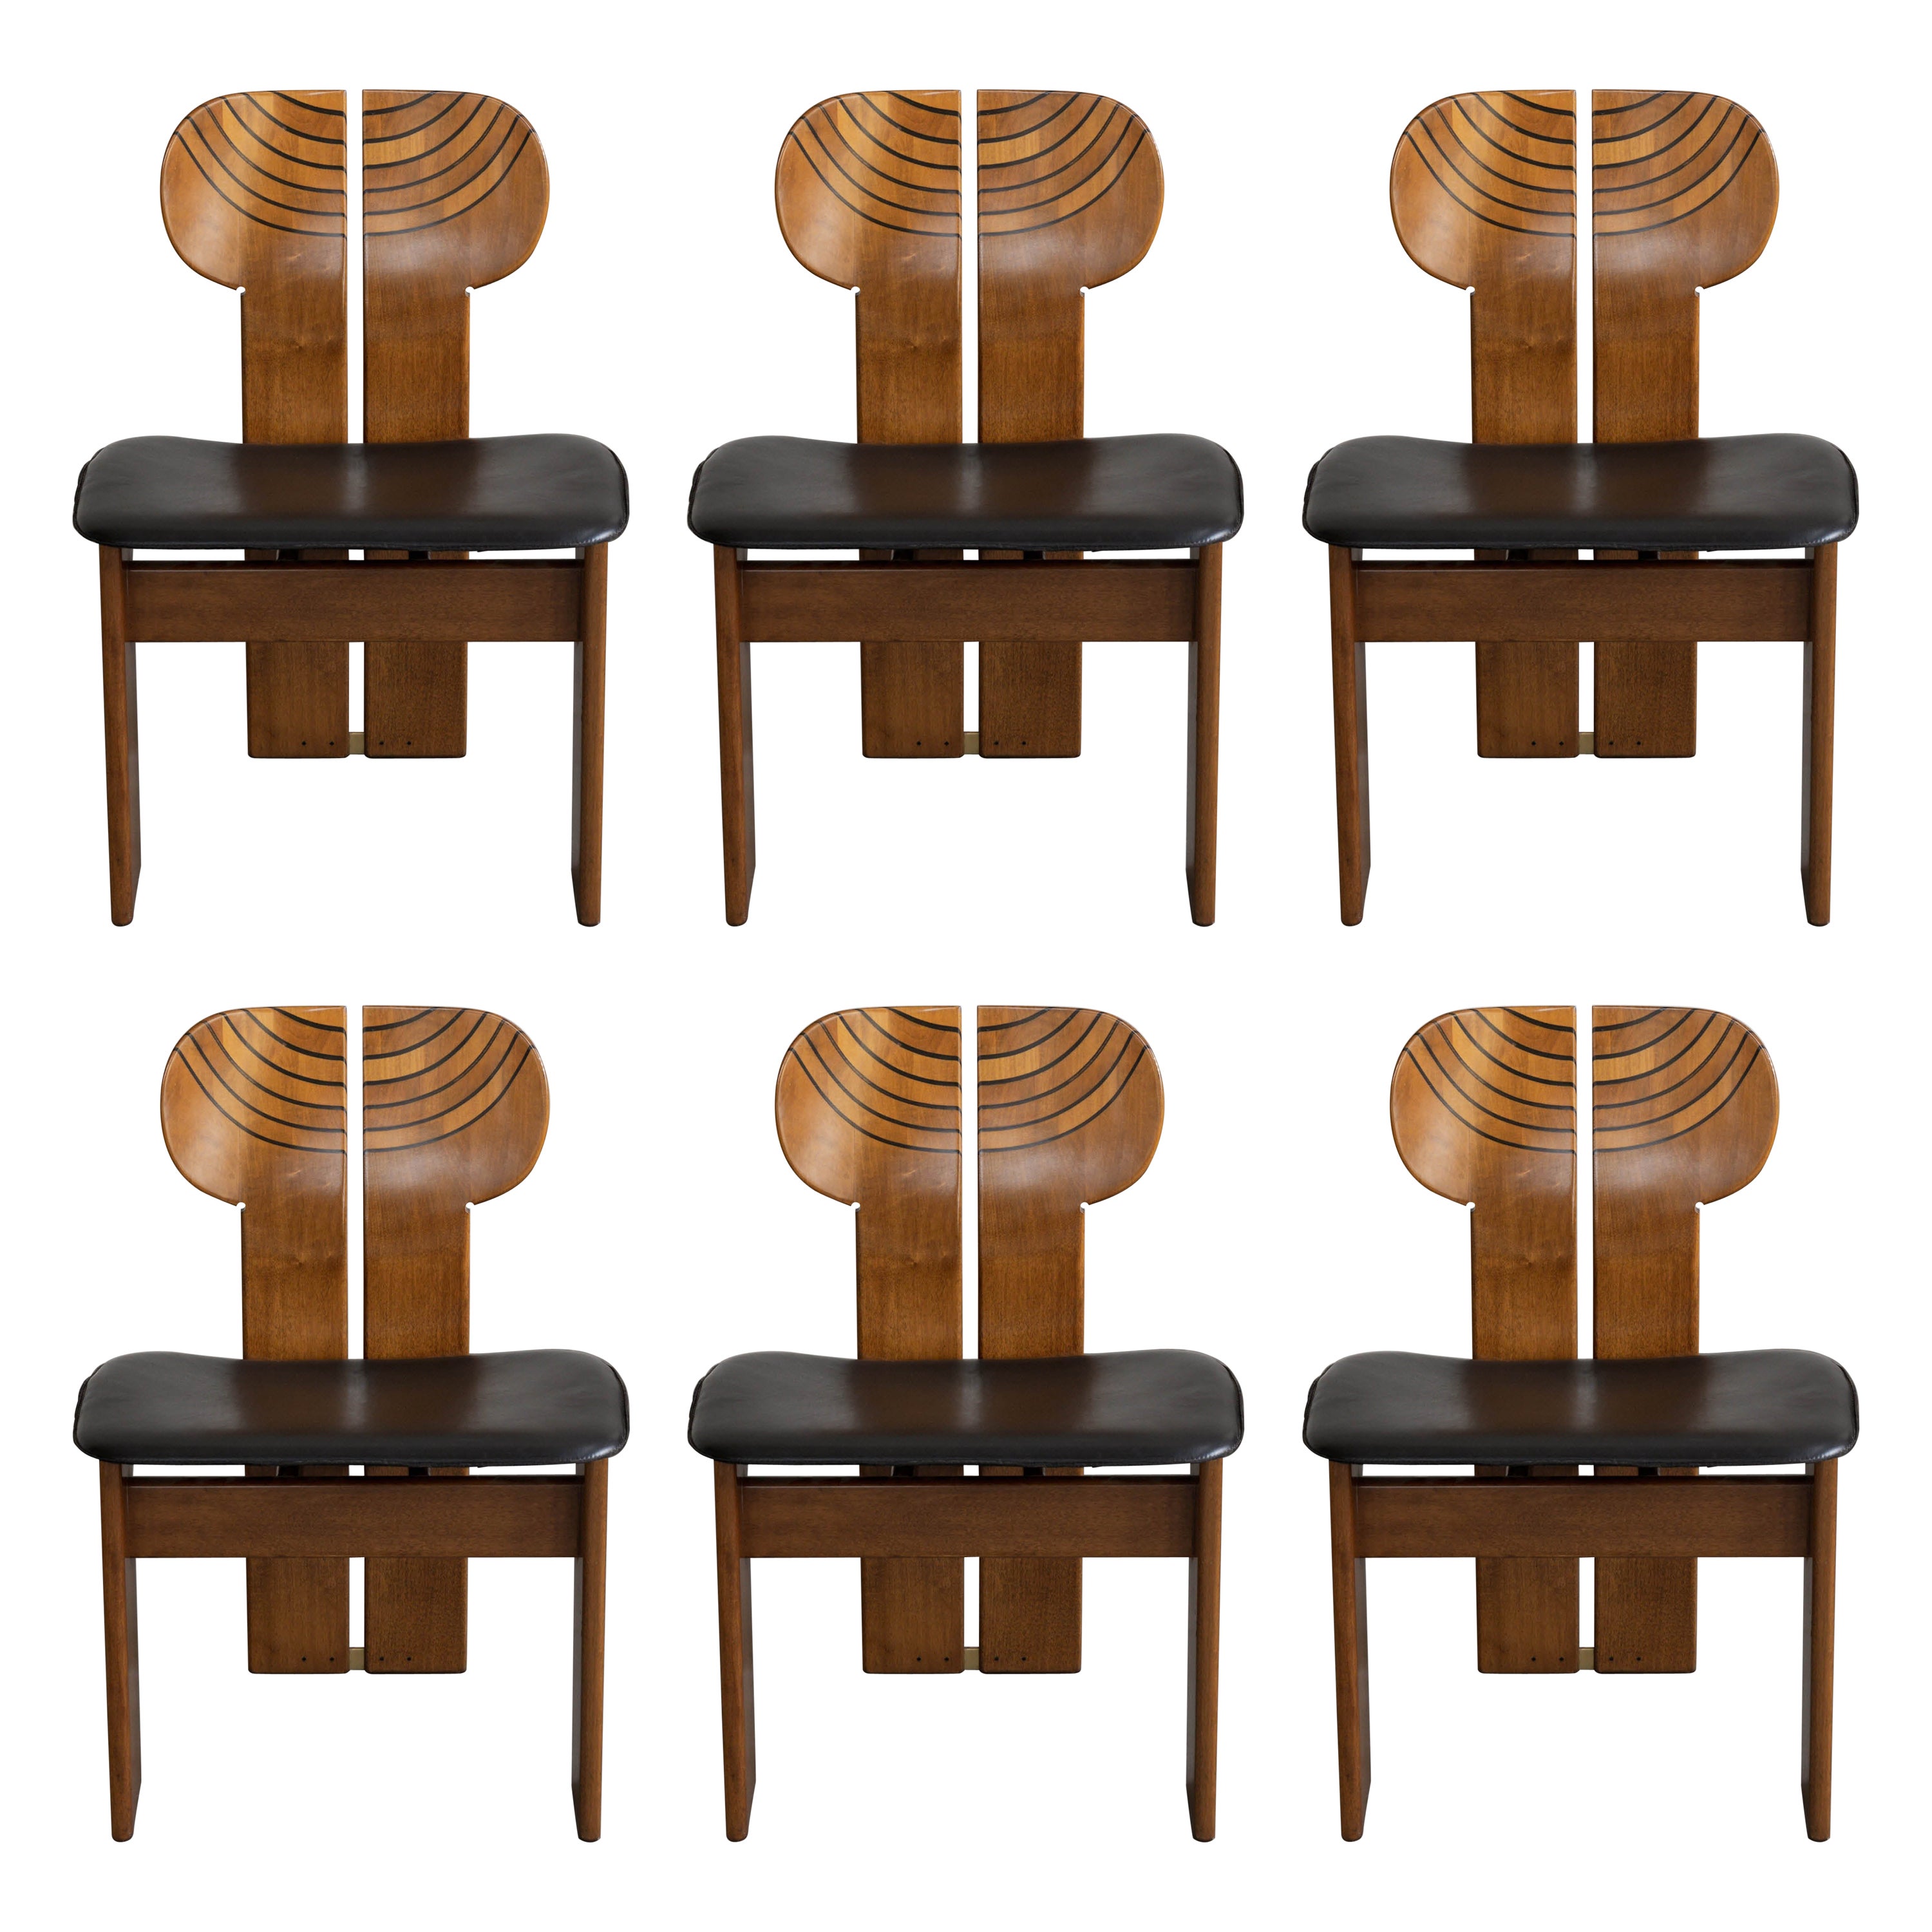 Afra & Tobia Scarpa "Africa" Dining Chairs for Maxalto, 1975, Set of 6